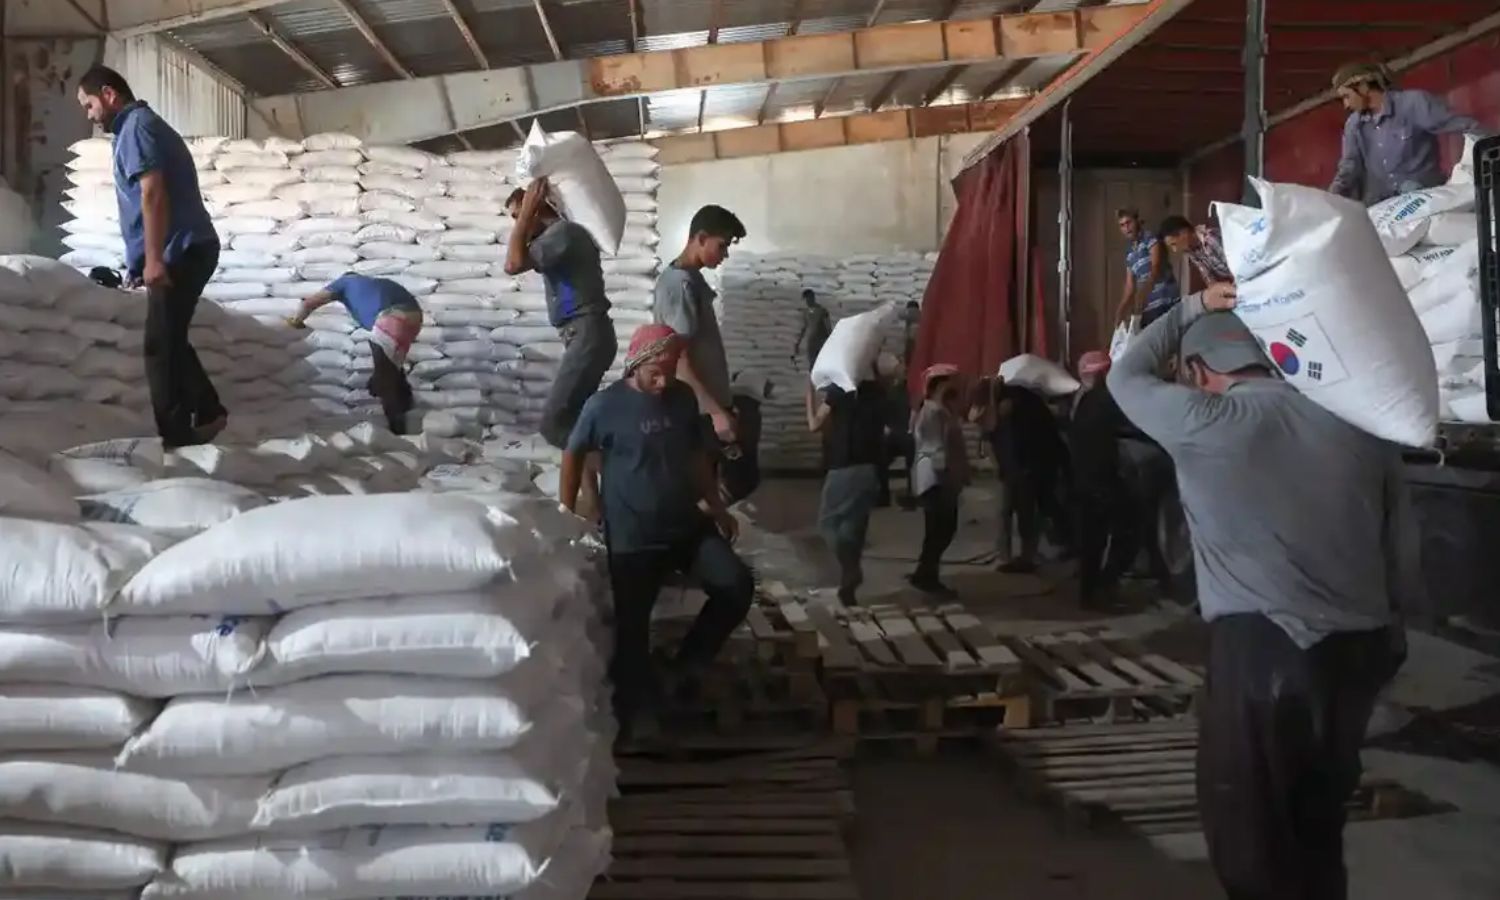 Workers unloading bags of aid in a warehouse near the Bab al-Hawa border crossing - July 10, 2023 (AFP)